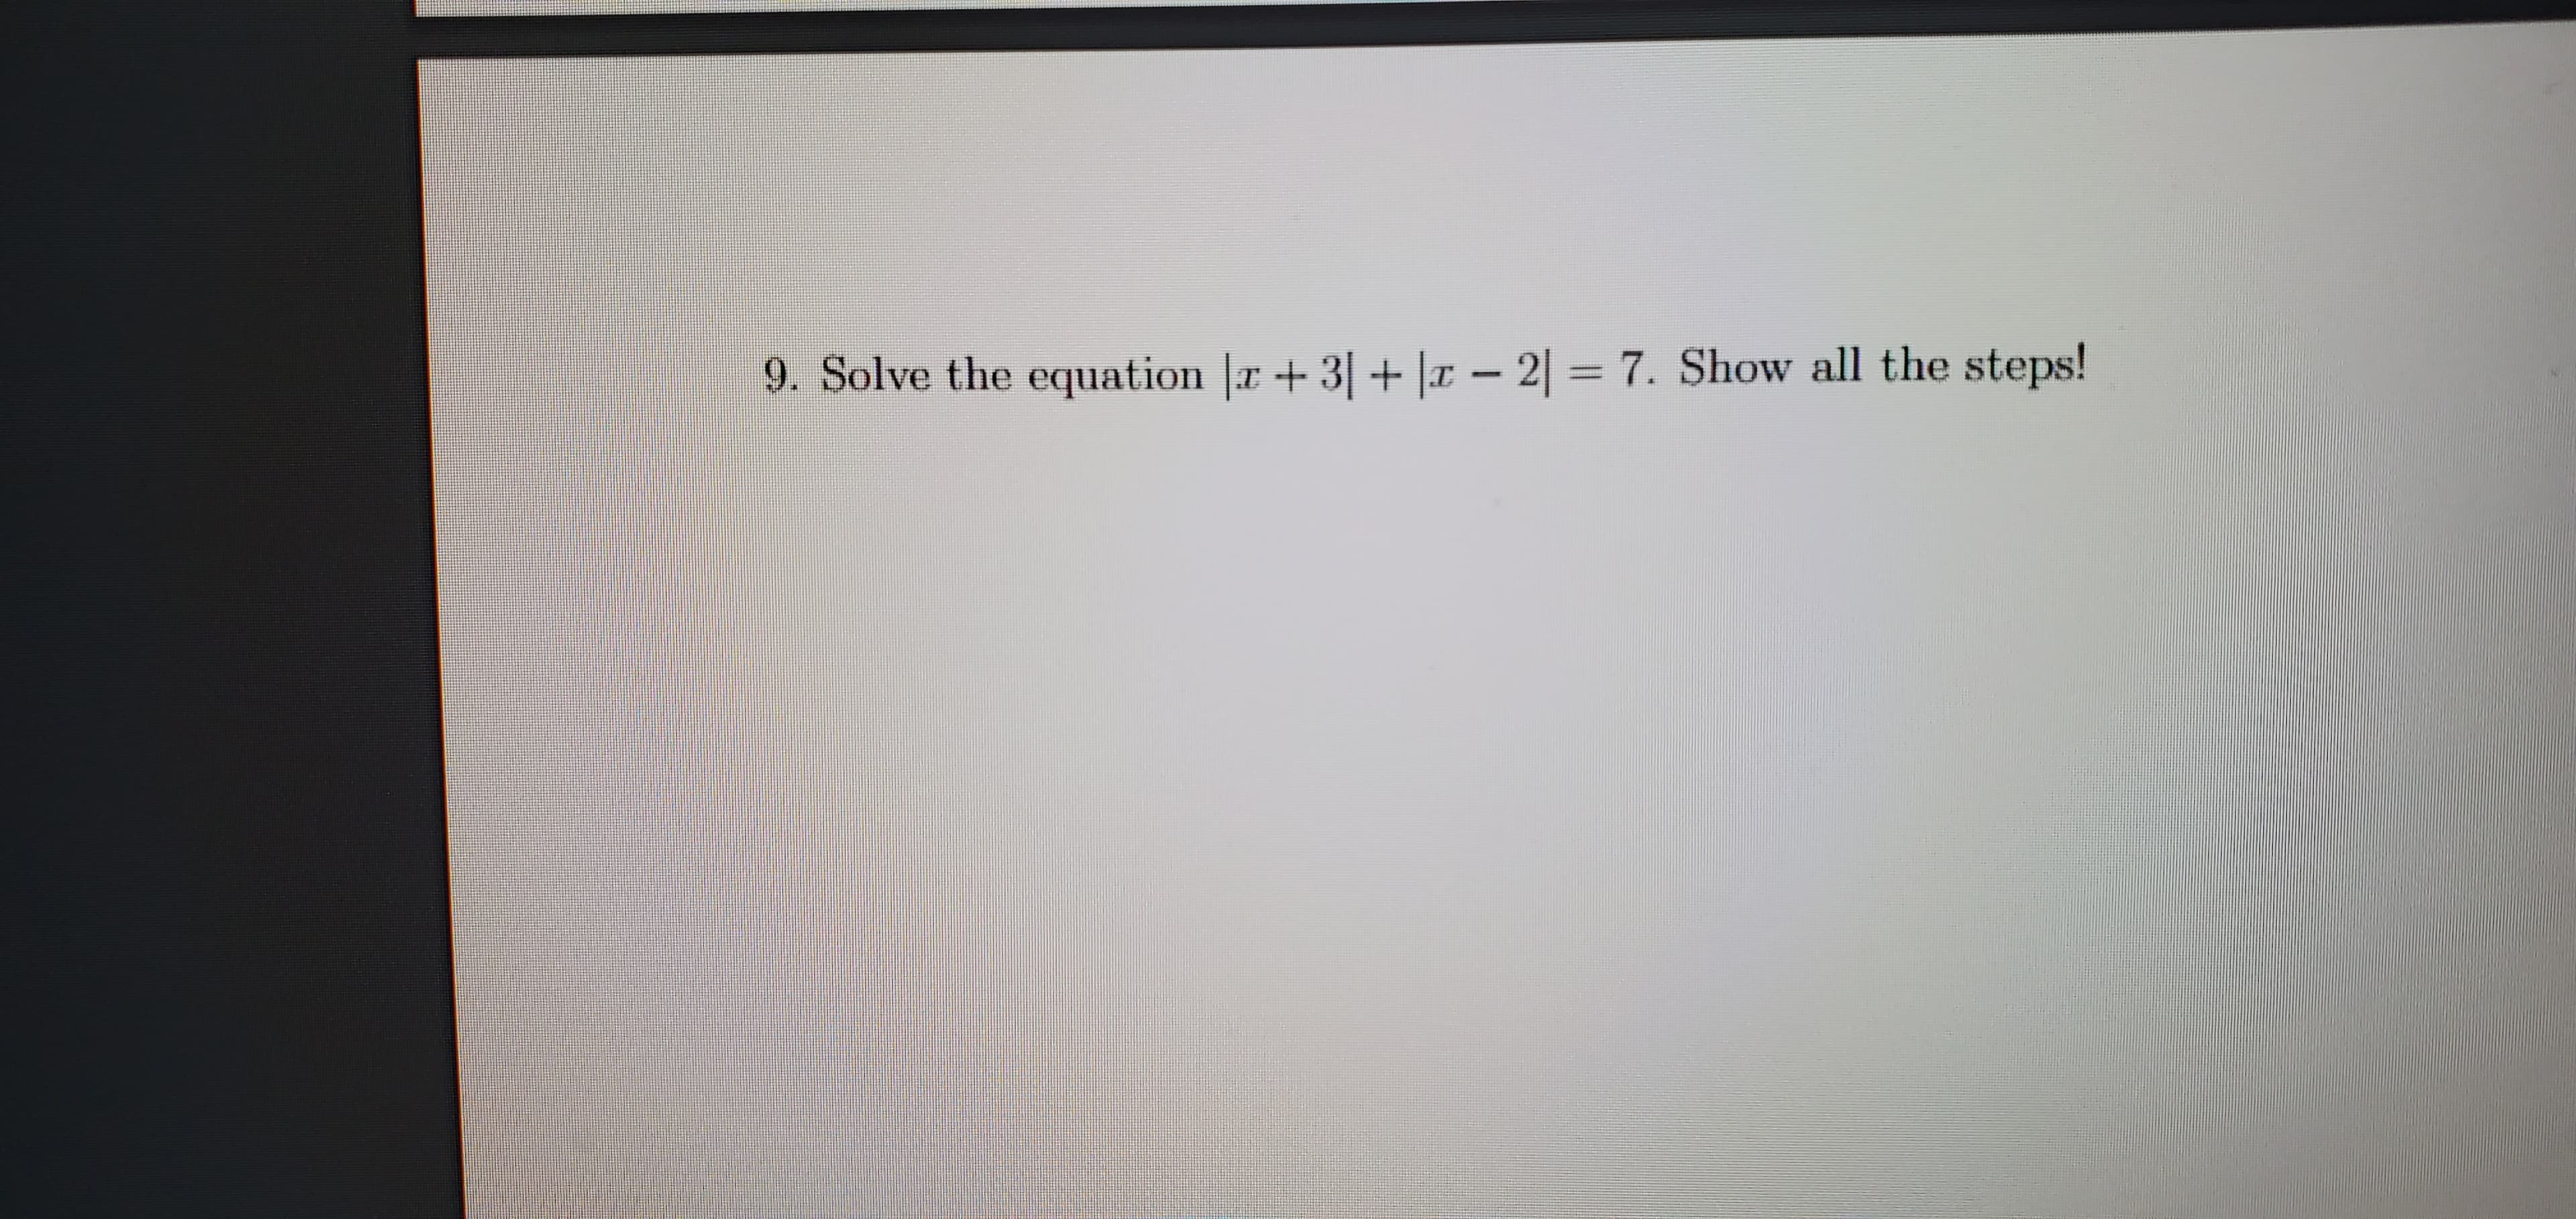 9. Solve the equation |r + 3| + |x – 2| = 7. Show all the steps!
